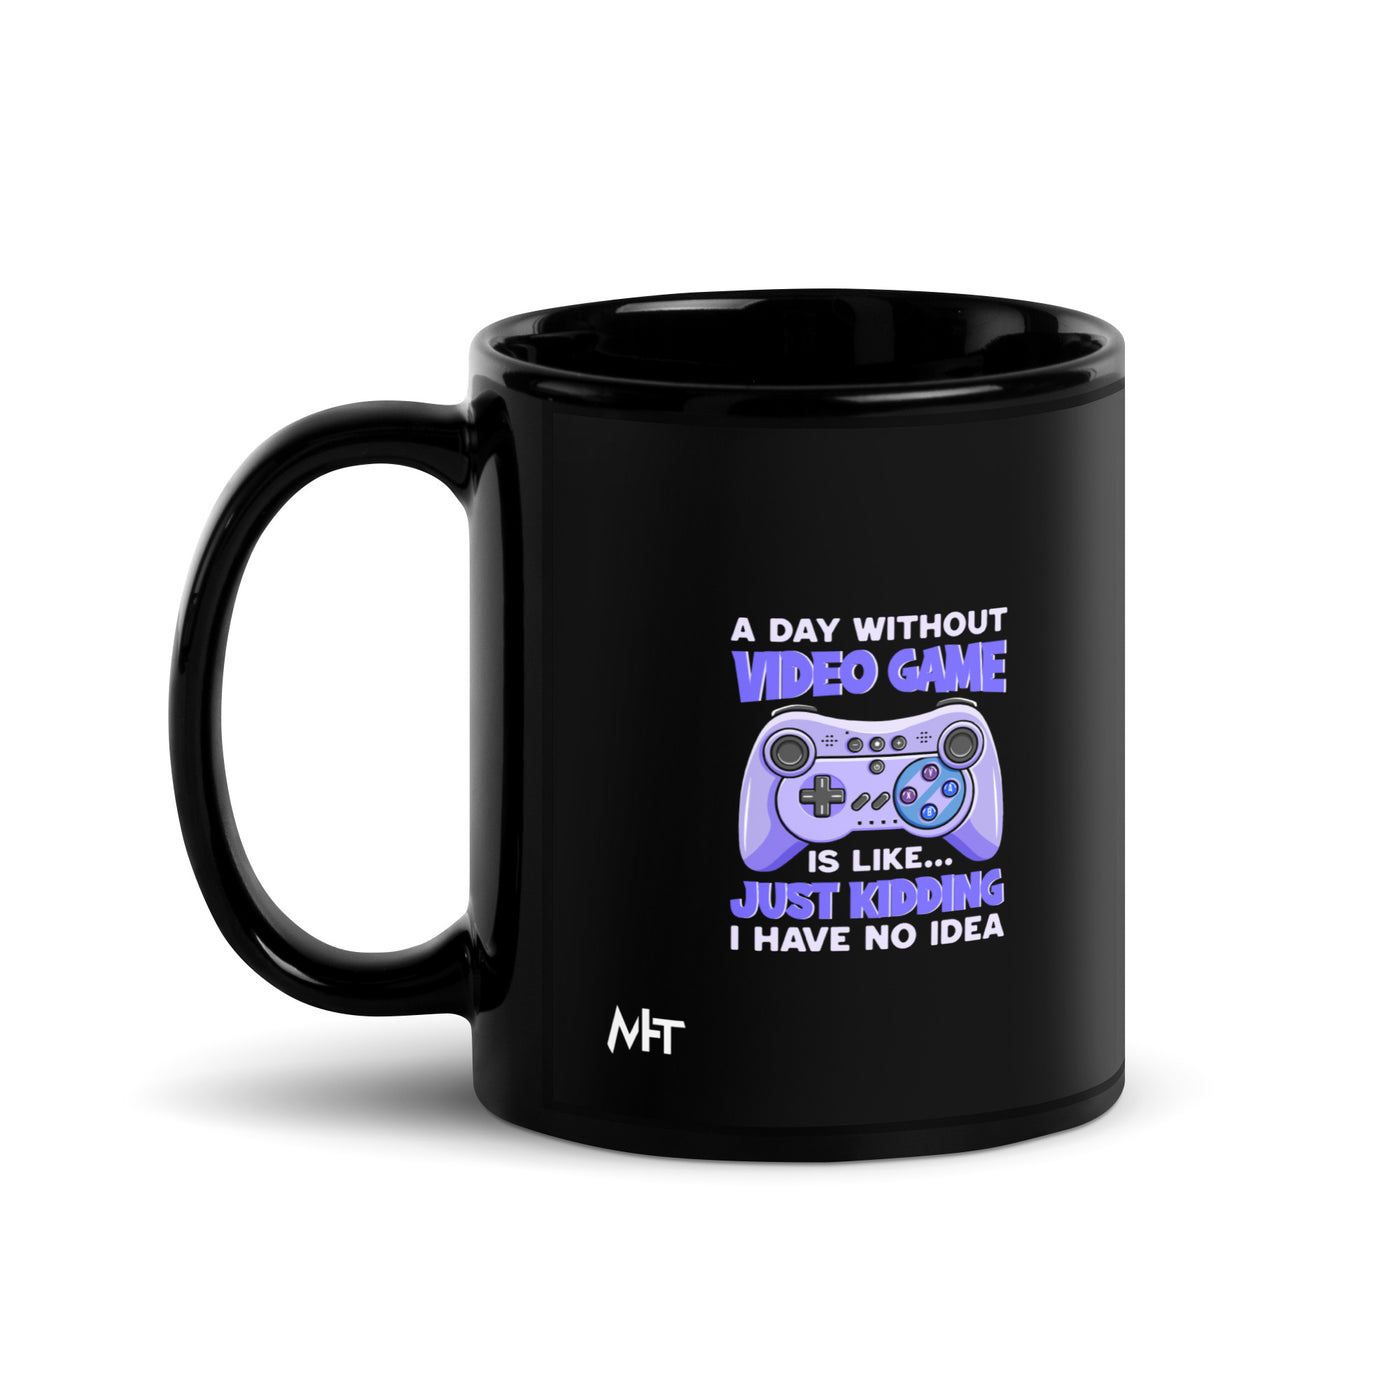 A Day without Video Game is; Just Kidding! I have no Idea - Black Glossy Mug